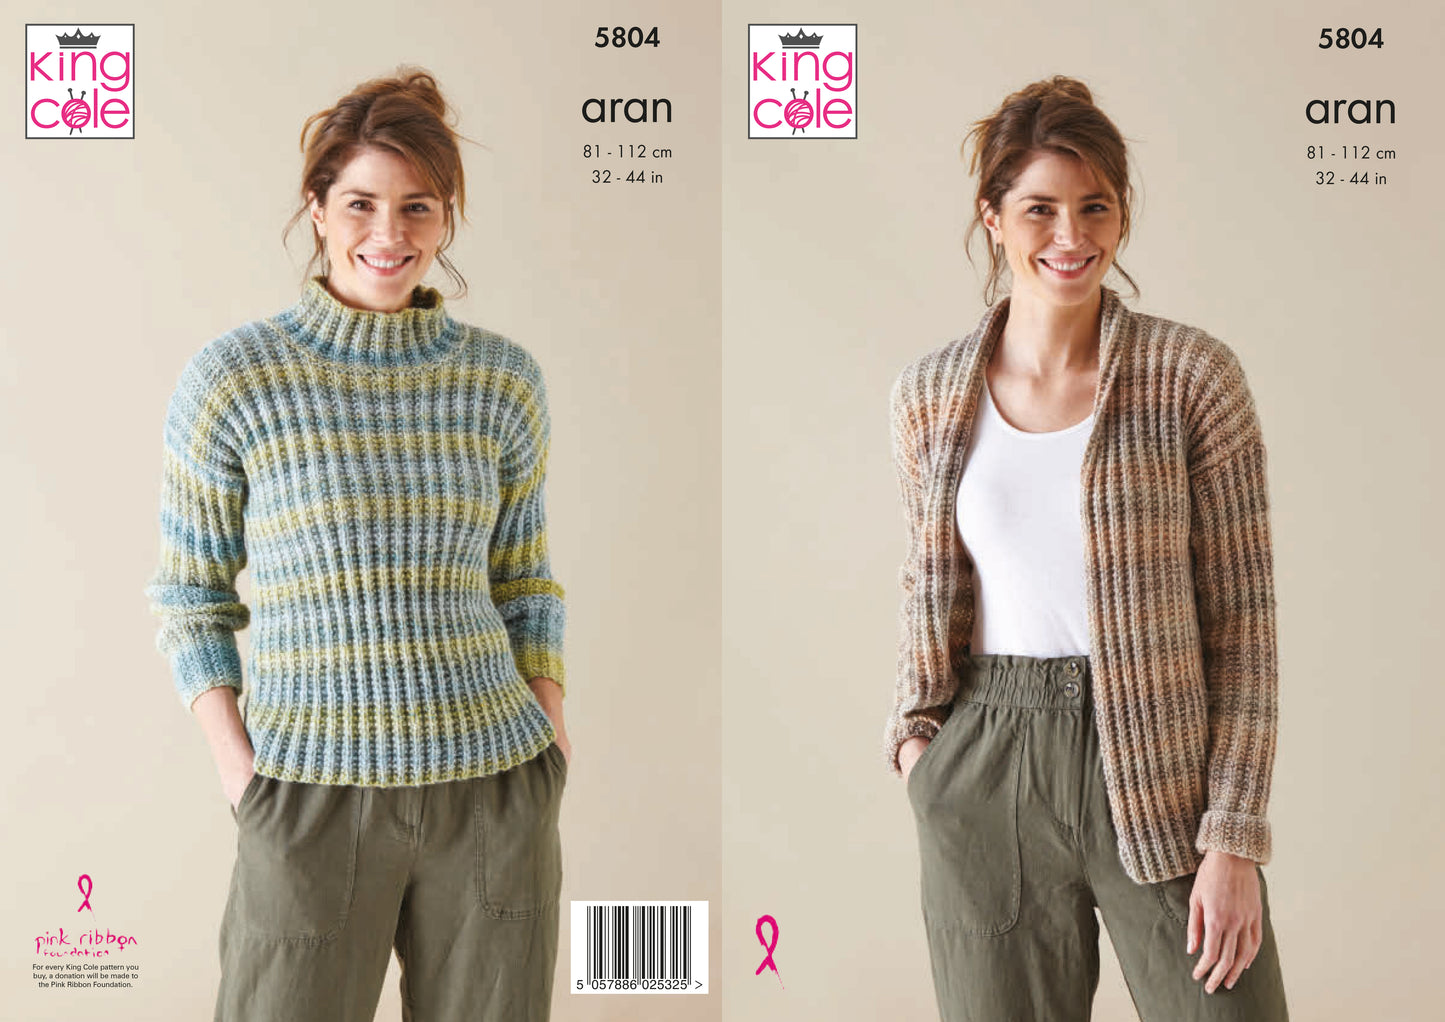 King Cole Acorn Pattern 5804 - Jacket and Sweater